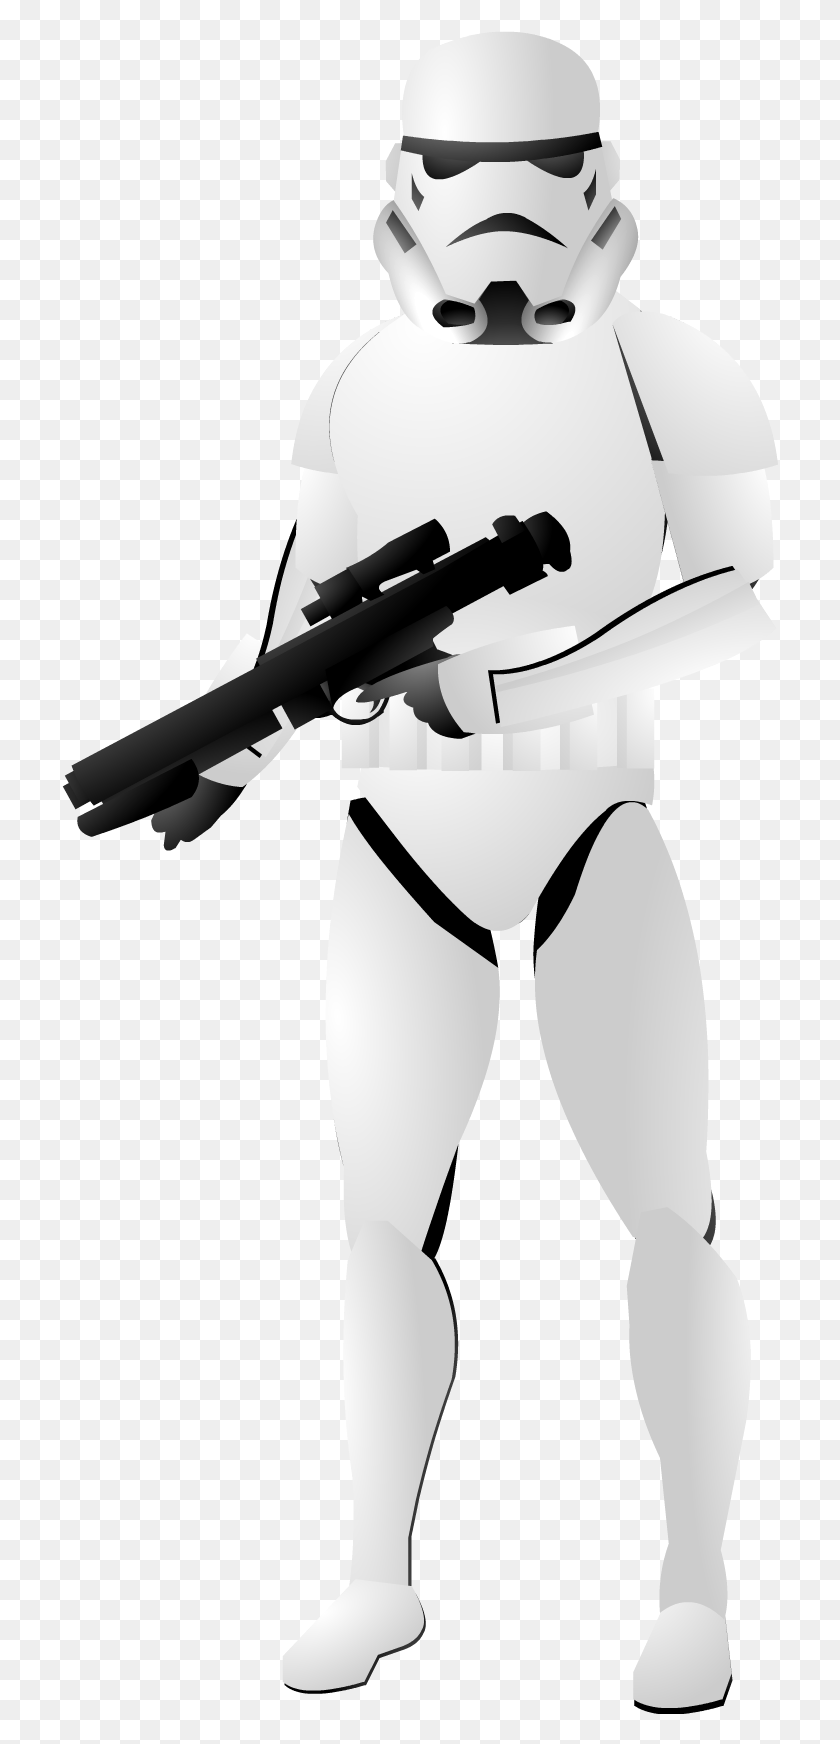 717x1684 Descargar Png Stormtrooper Storm Troopers, Persona, Humano, Instrumento Musical Hd Png